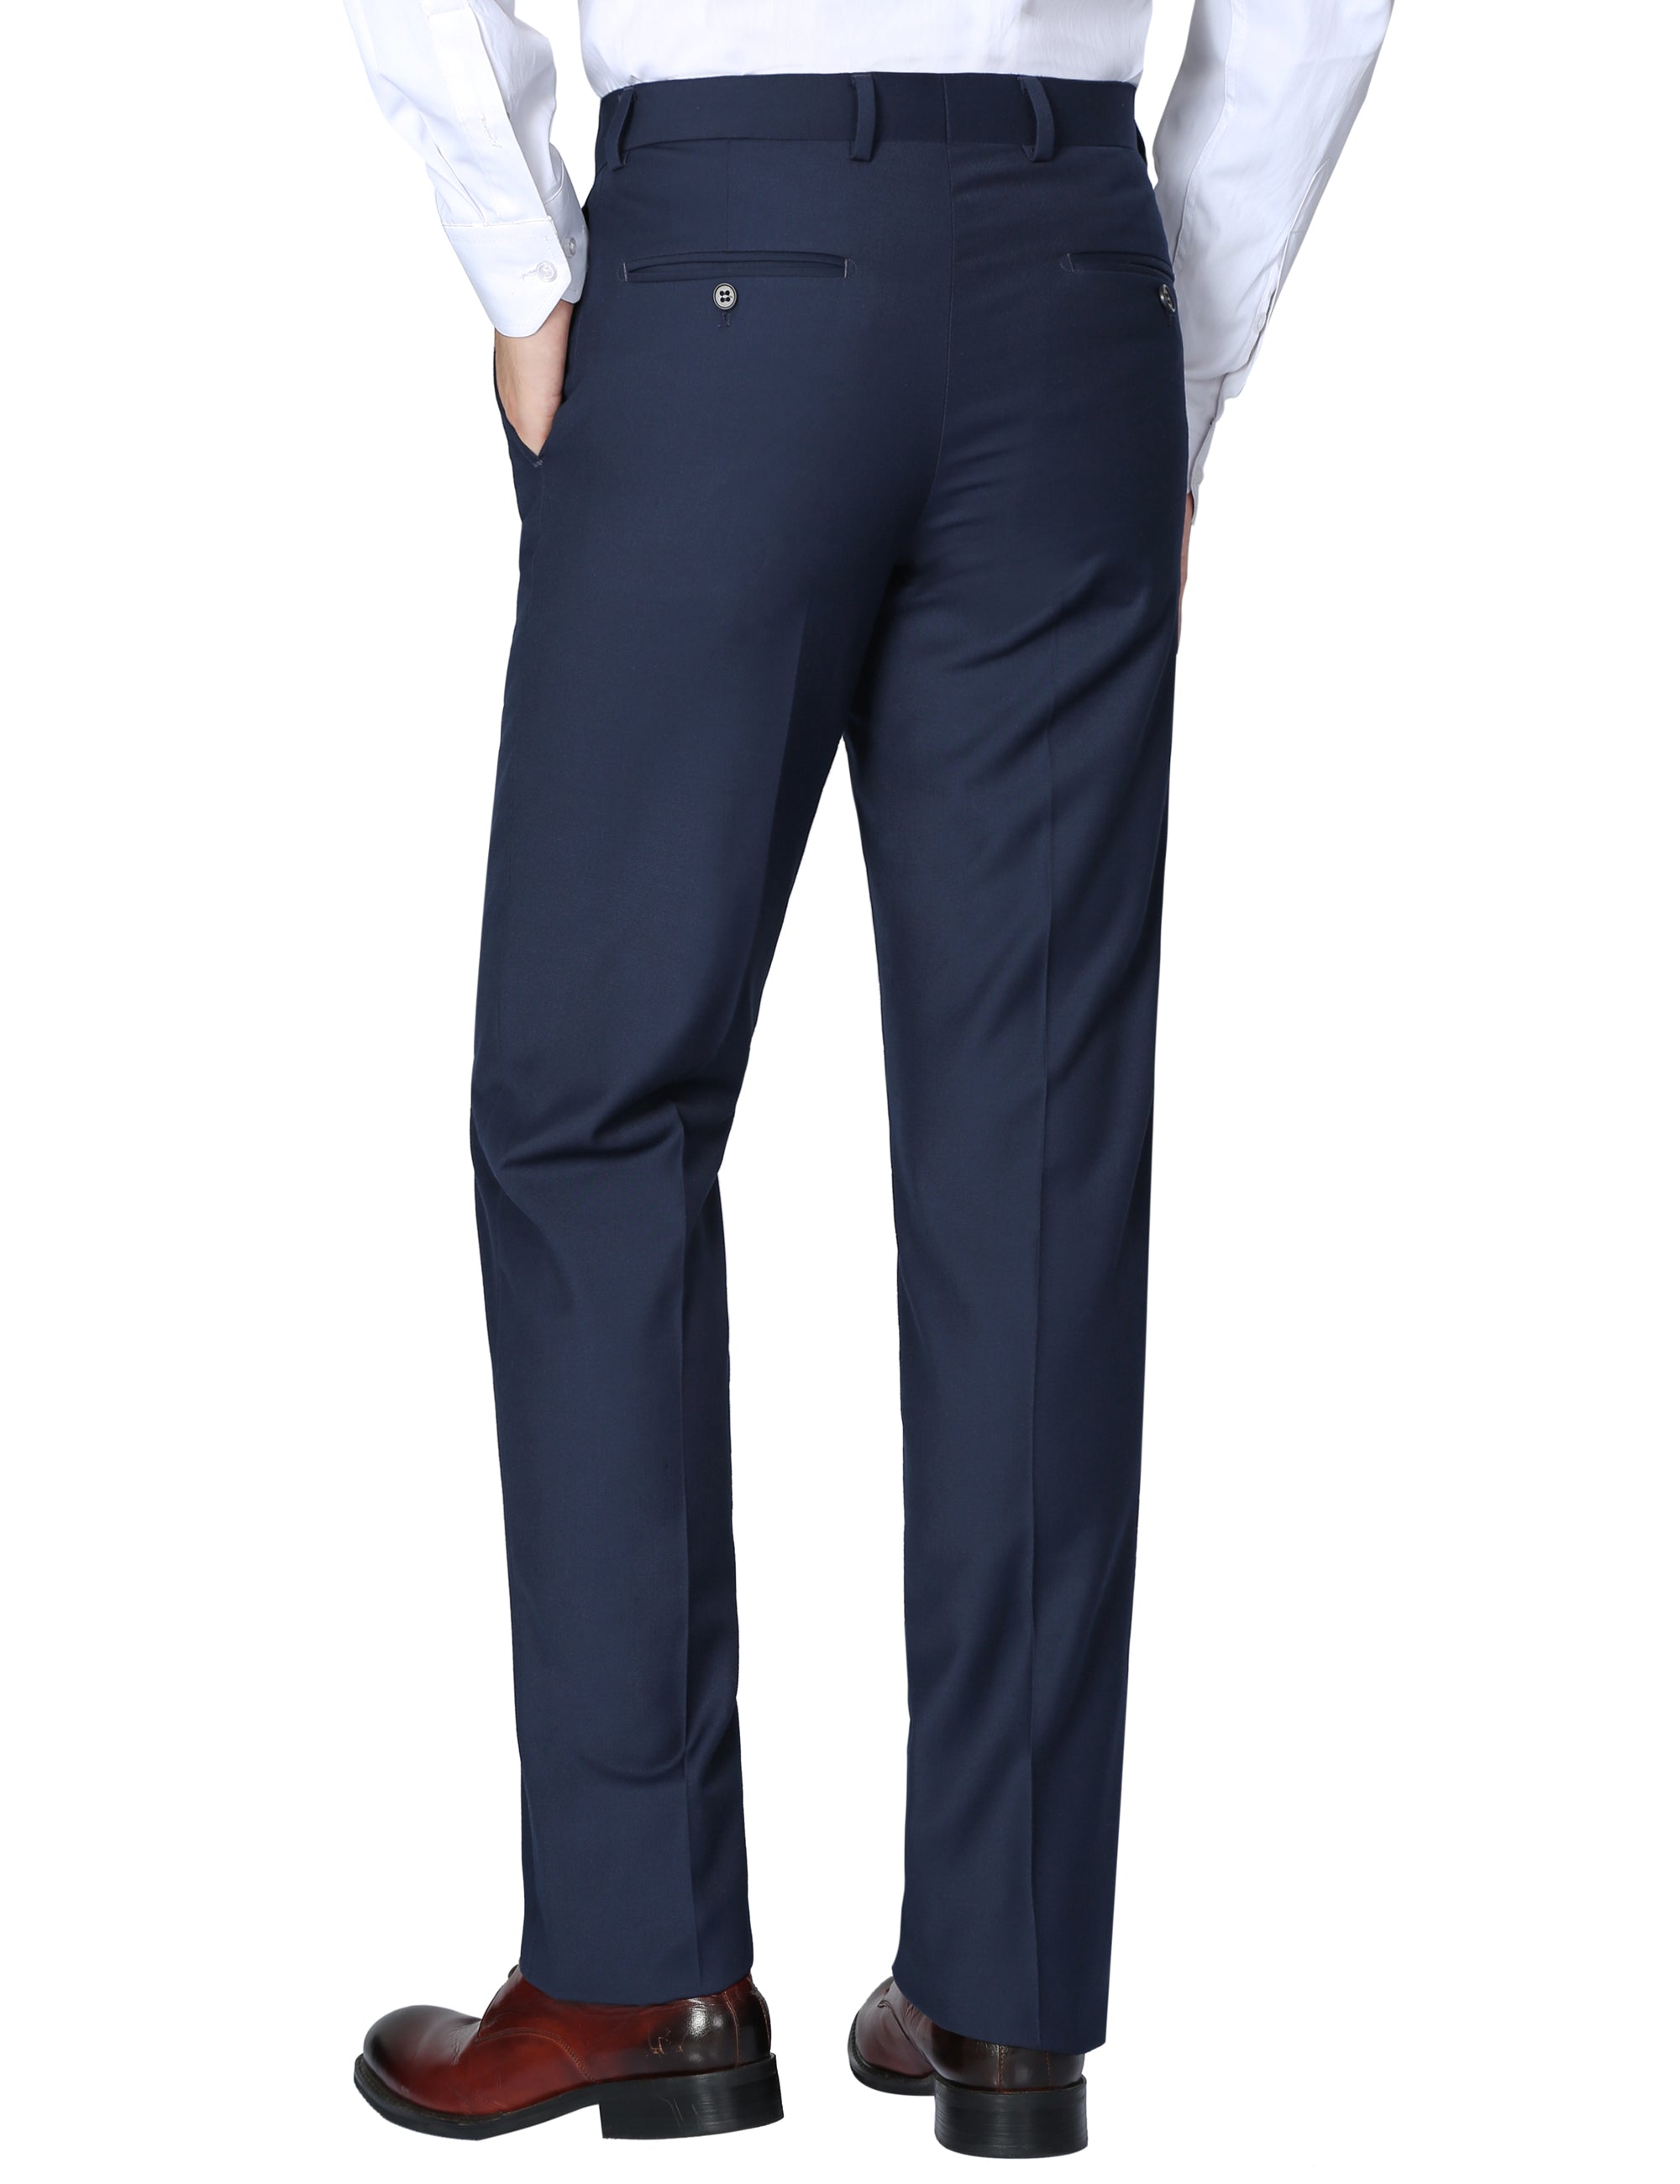 Men Straight Leg Suit Pants Wedding Tailored Fit Long Trousers Casual Formal  New | eBay